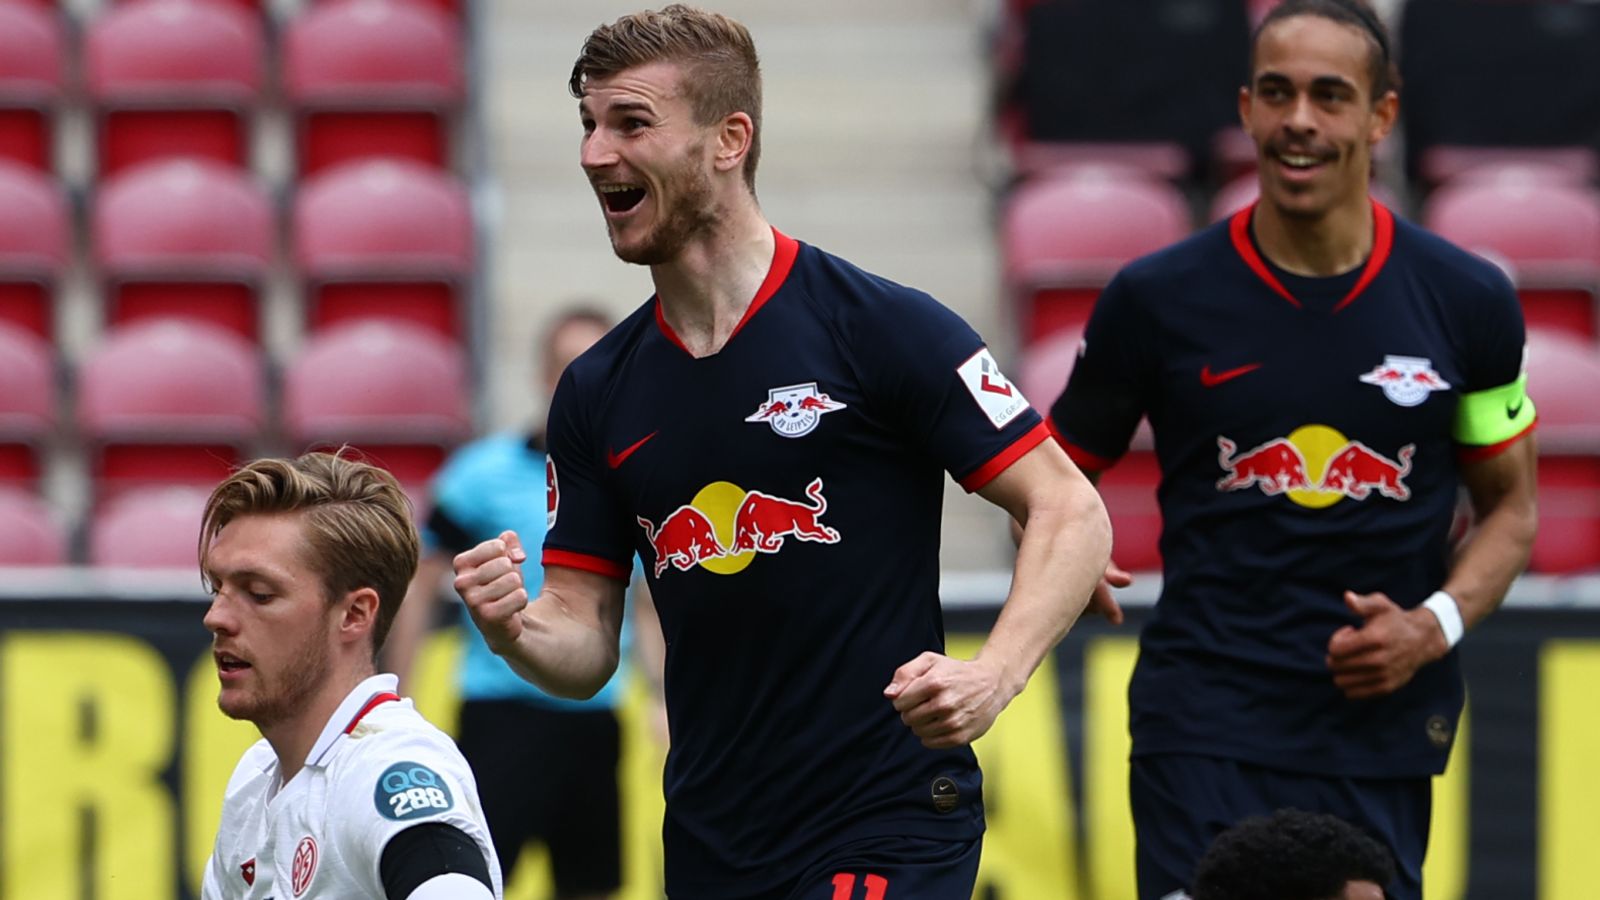 Mainz Secures Full Deal to Sign Leipzig Midfielder, Sky Reports